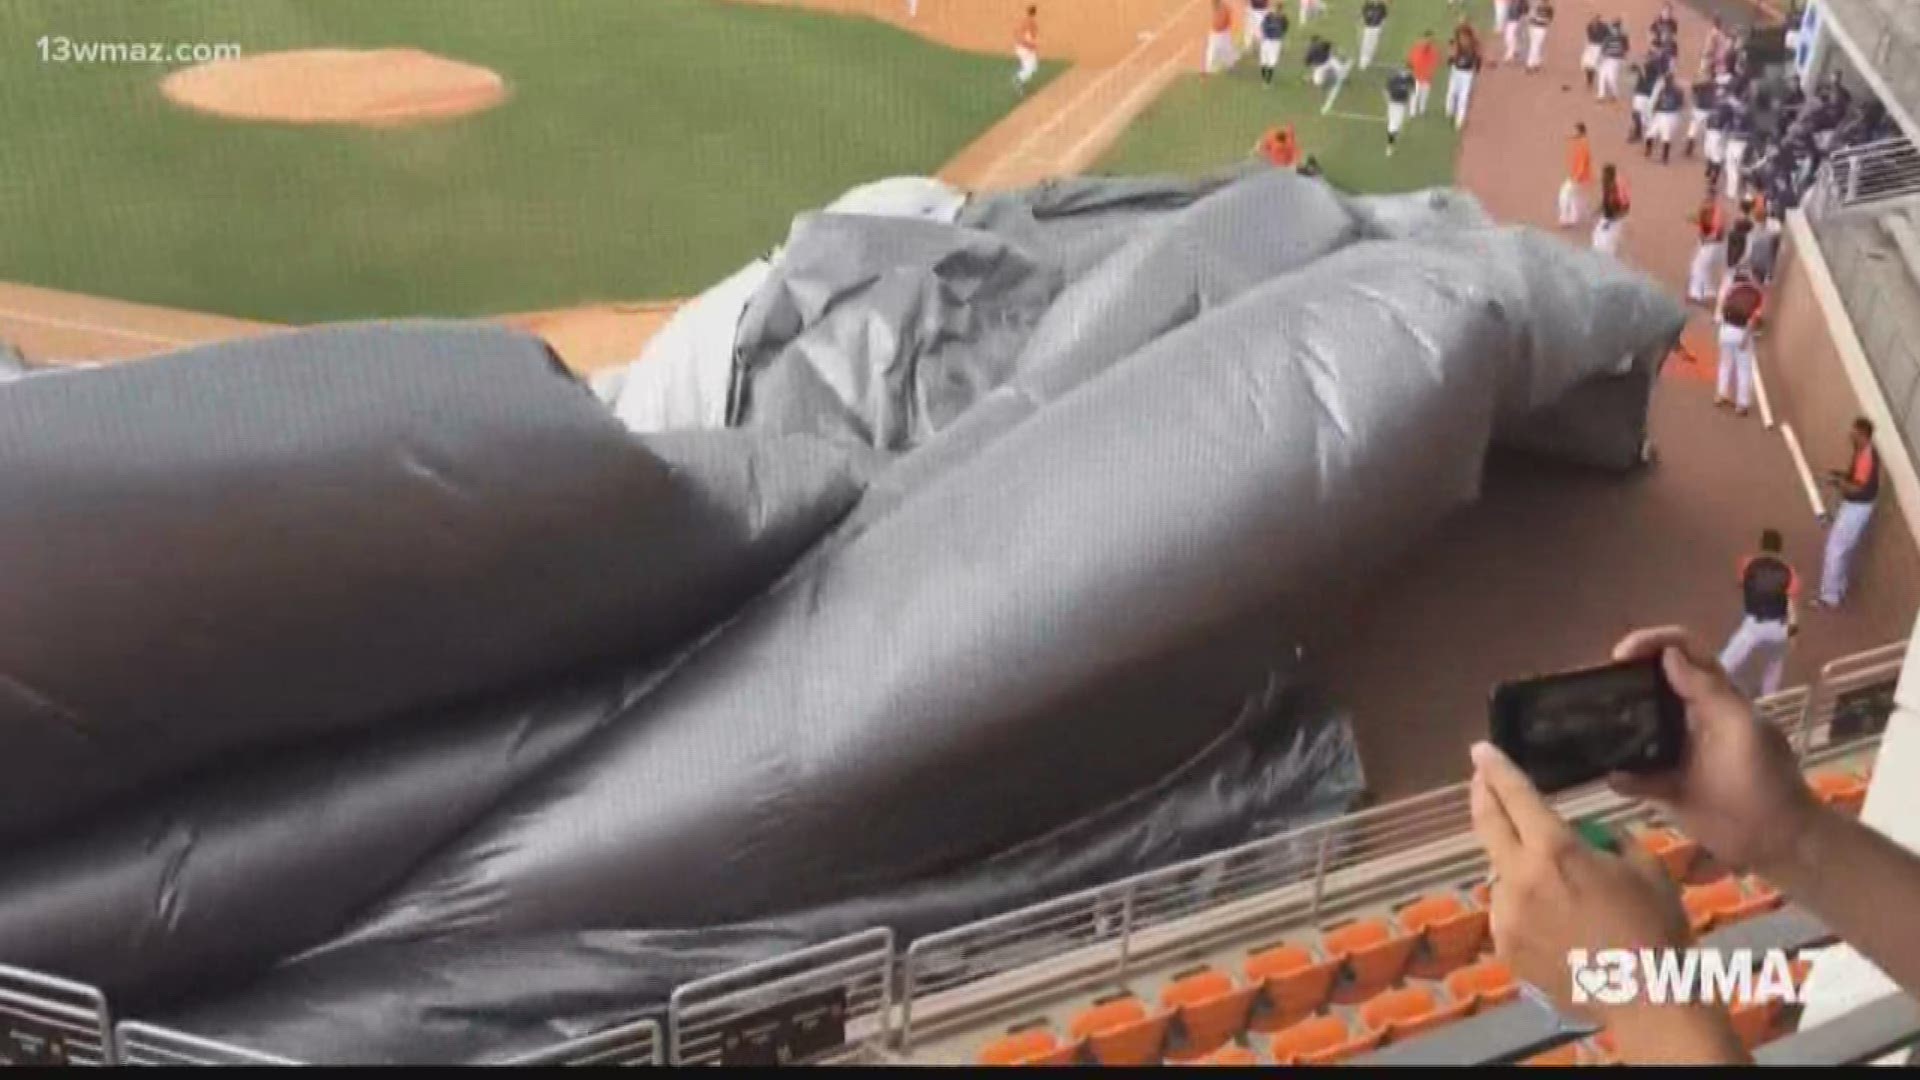 The Mercer baseball team suffered from a bit of tarp trouble over the weekend resulting in a video that went viral on social media. The Baseball Bears were trying to get the tarp down before a storm moved in and you can see them doing their best, but the tarp has a mind of its own.